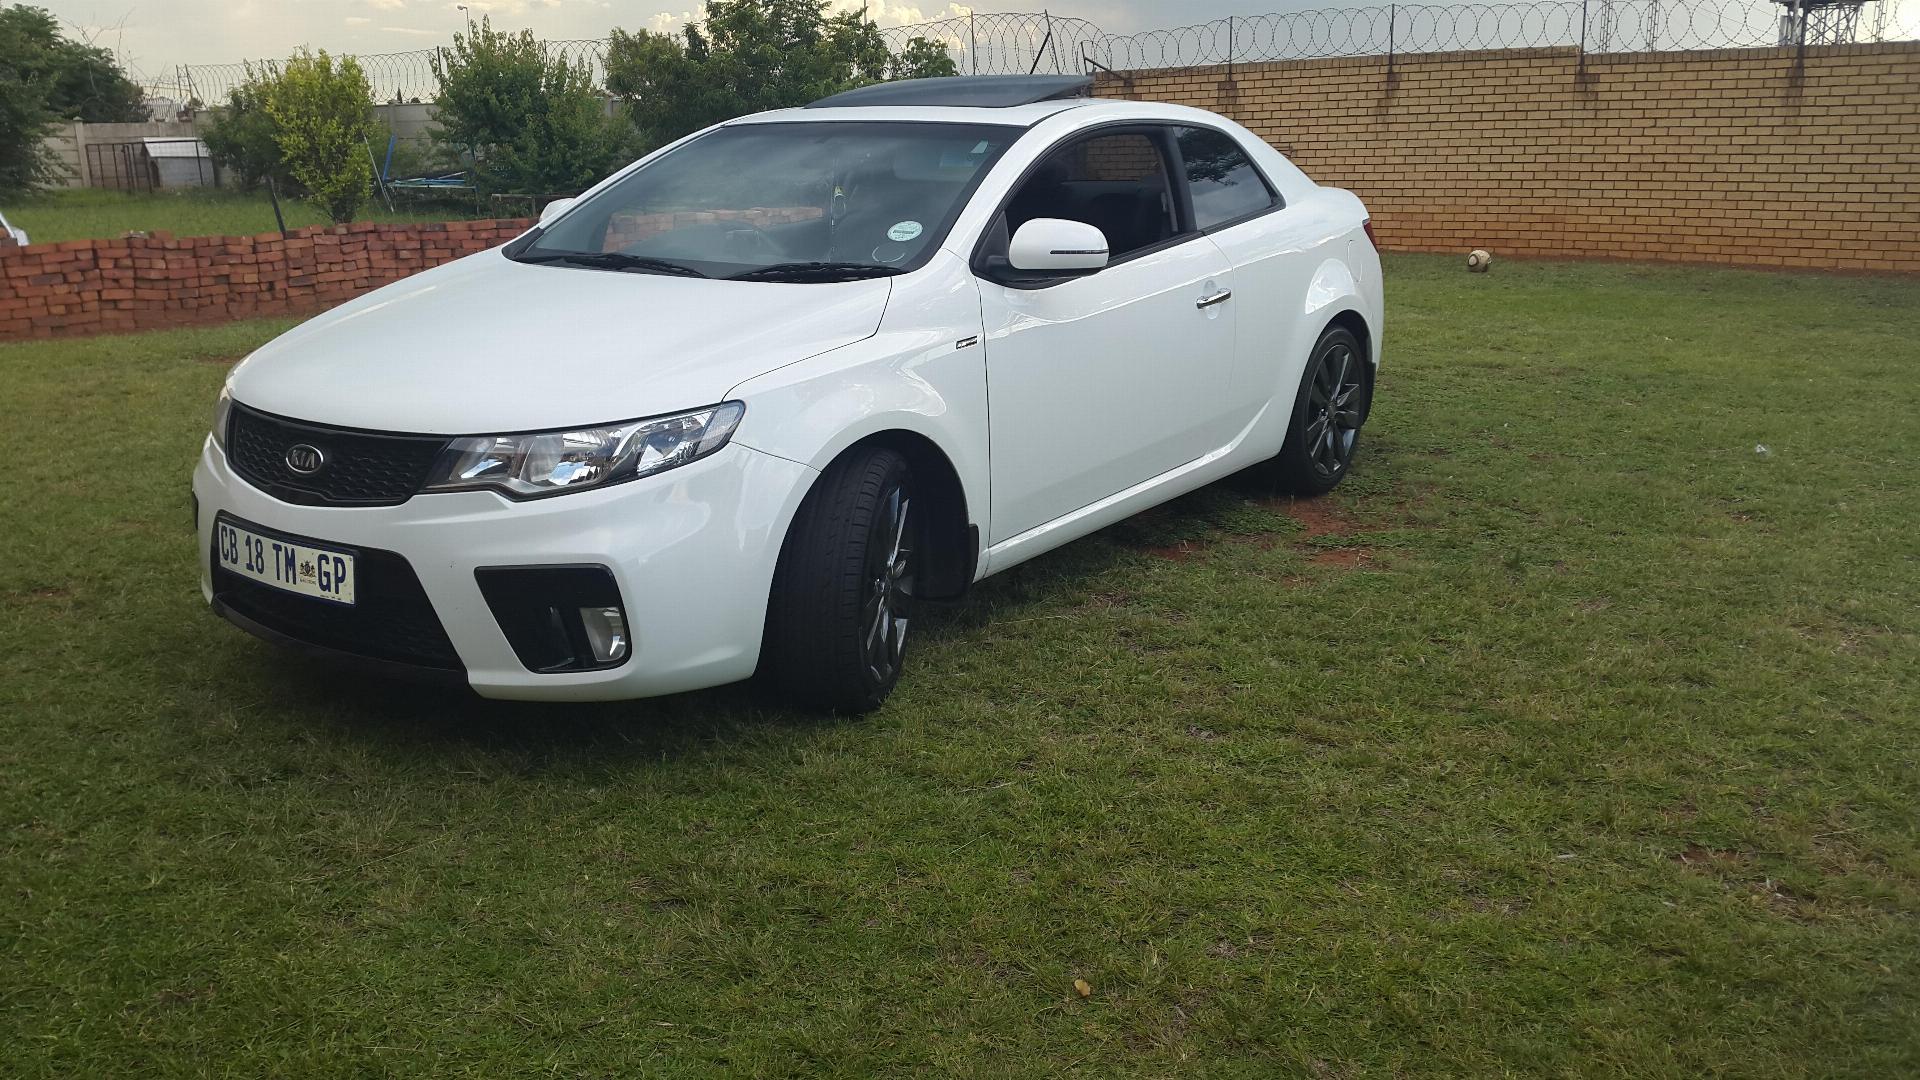 Used Kia Cerato 2.0 Koup A/T 2012 on auction - PV1010590